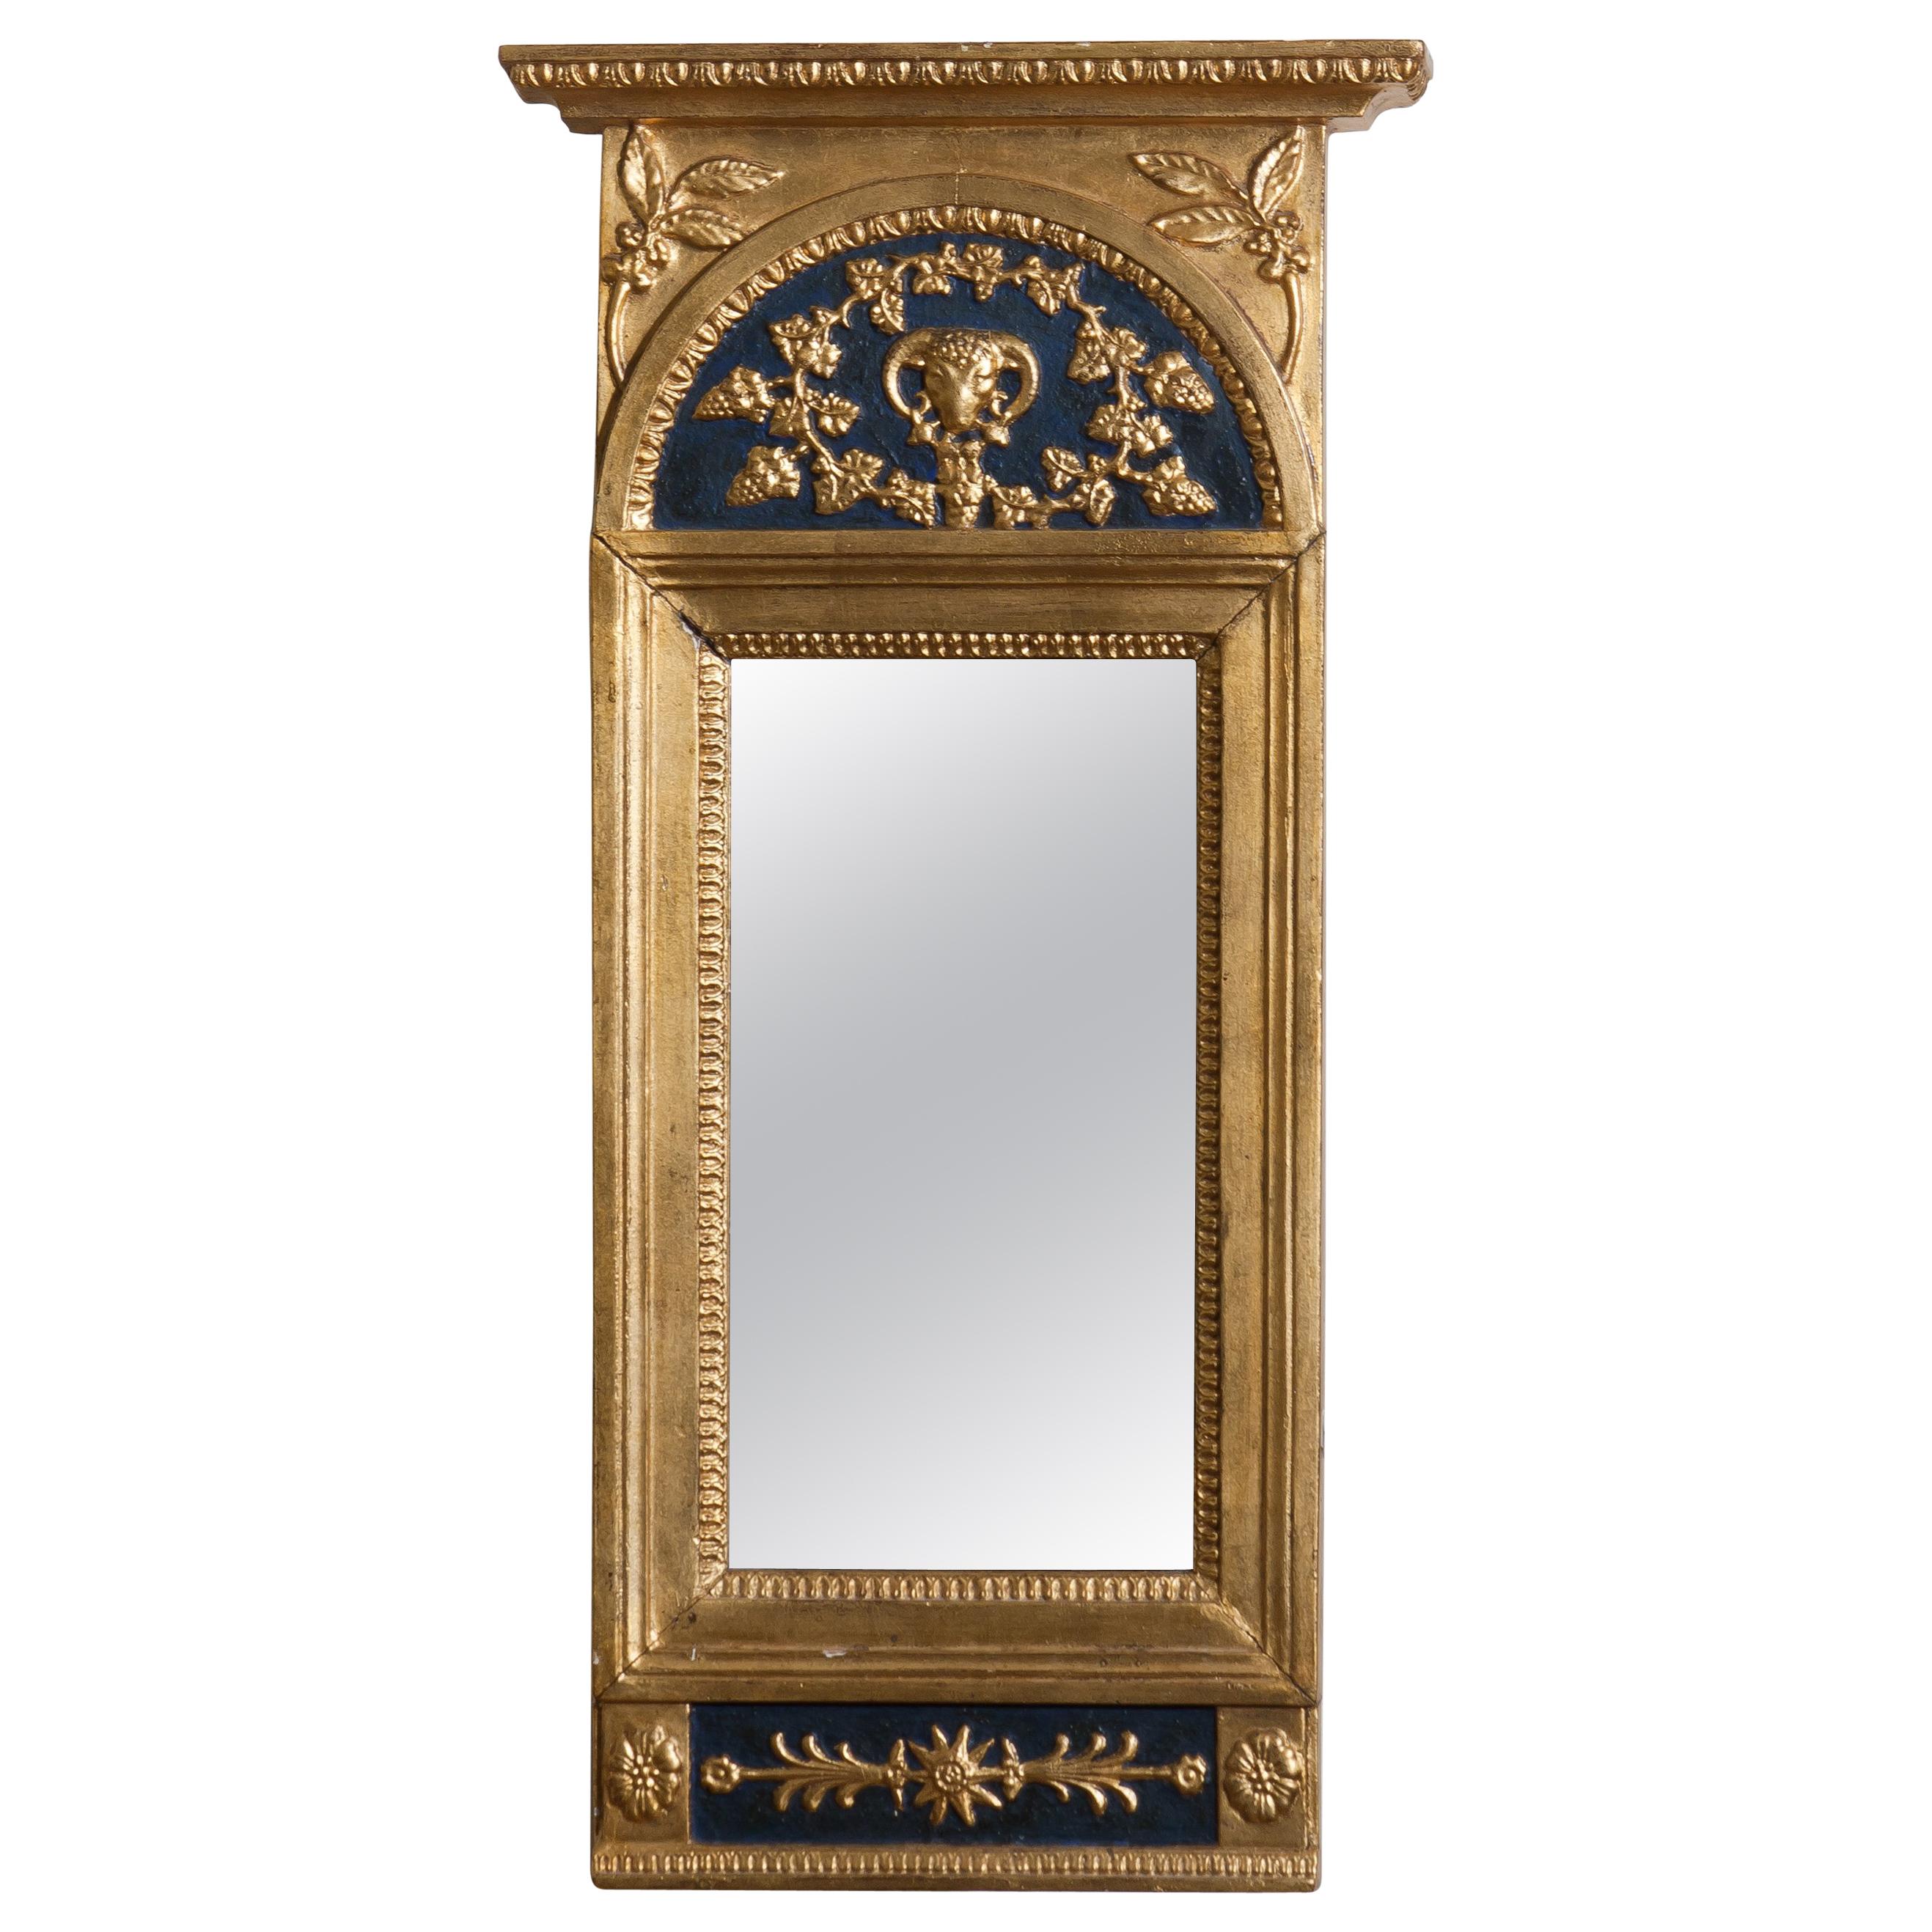 Gilded / panted Empire mirror, first half of the 1800s.
The mirror is in a later period restored and partly newly painted.
Overall condition is good.
 